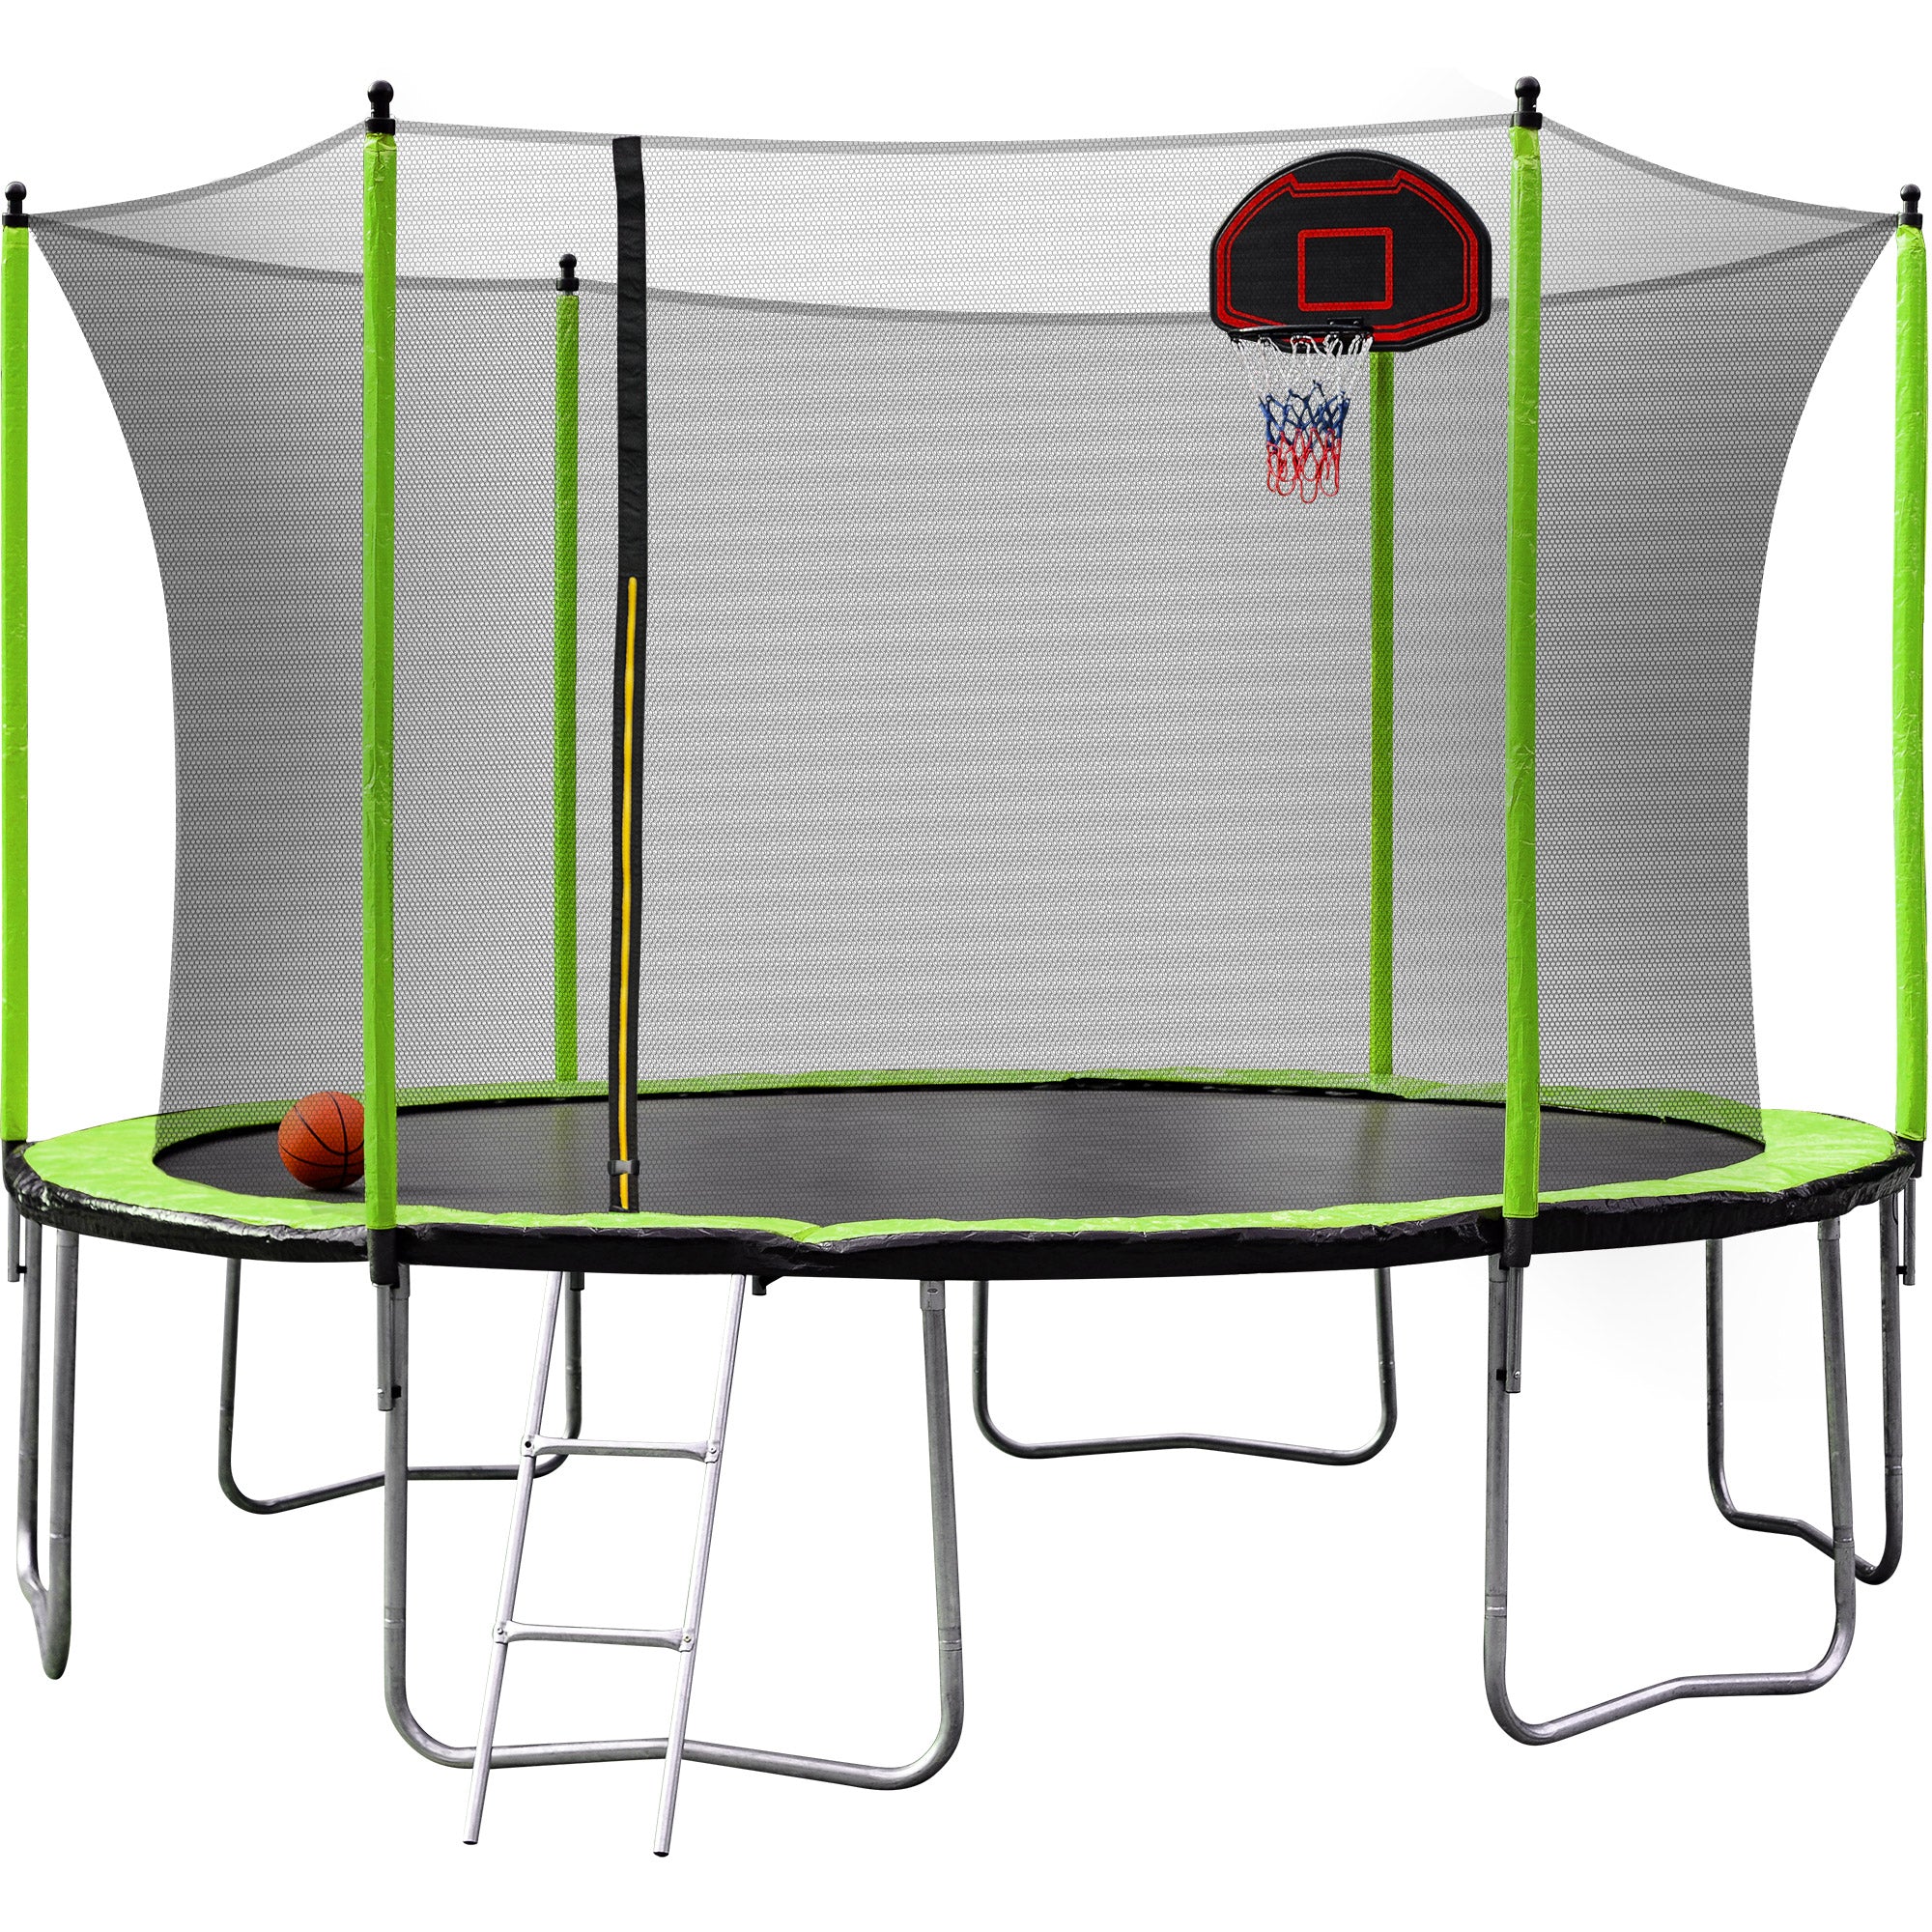 14FT Trampoline with Basketball Hoop Inflator and green-metal